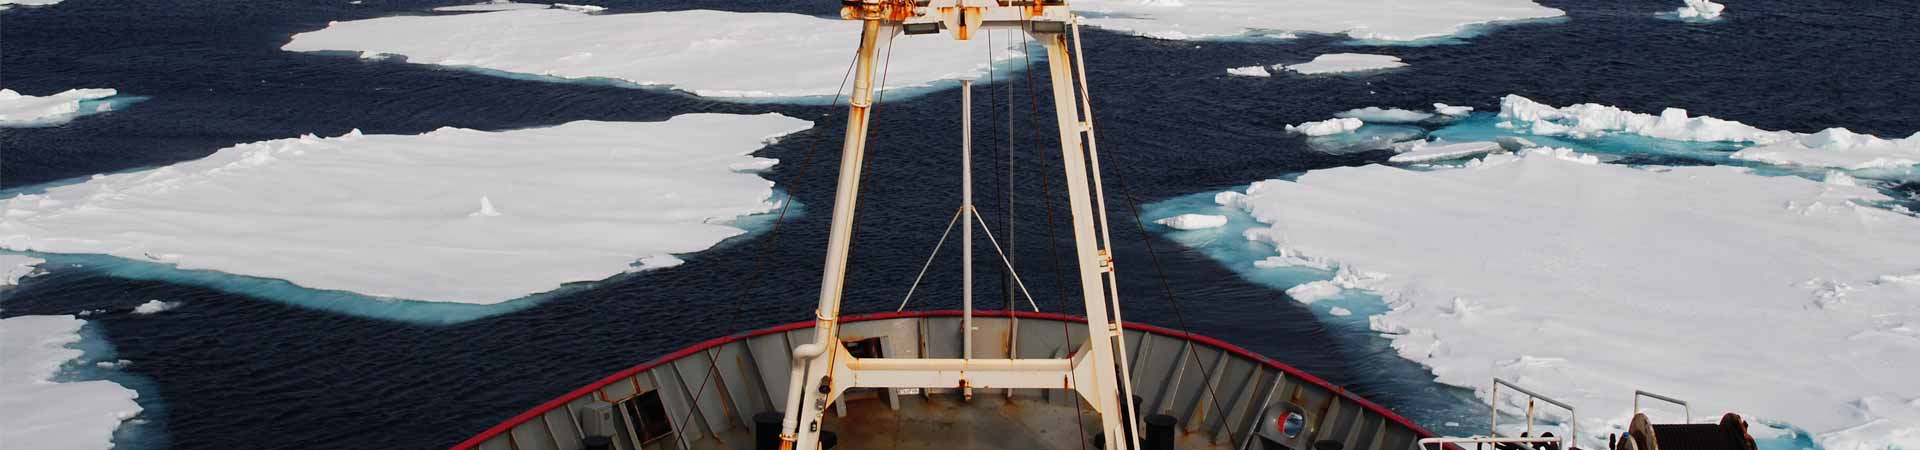 View from bow of a research vessel sailing though Arctic Ocean with sea ice